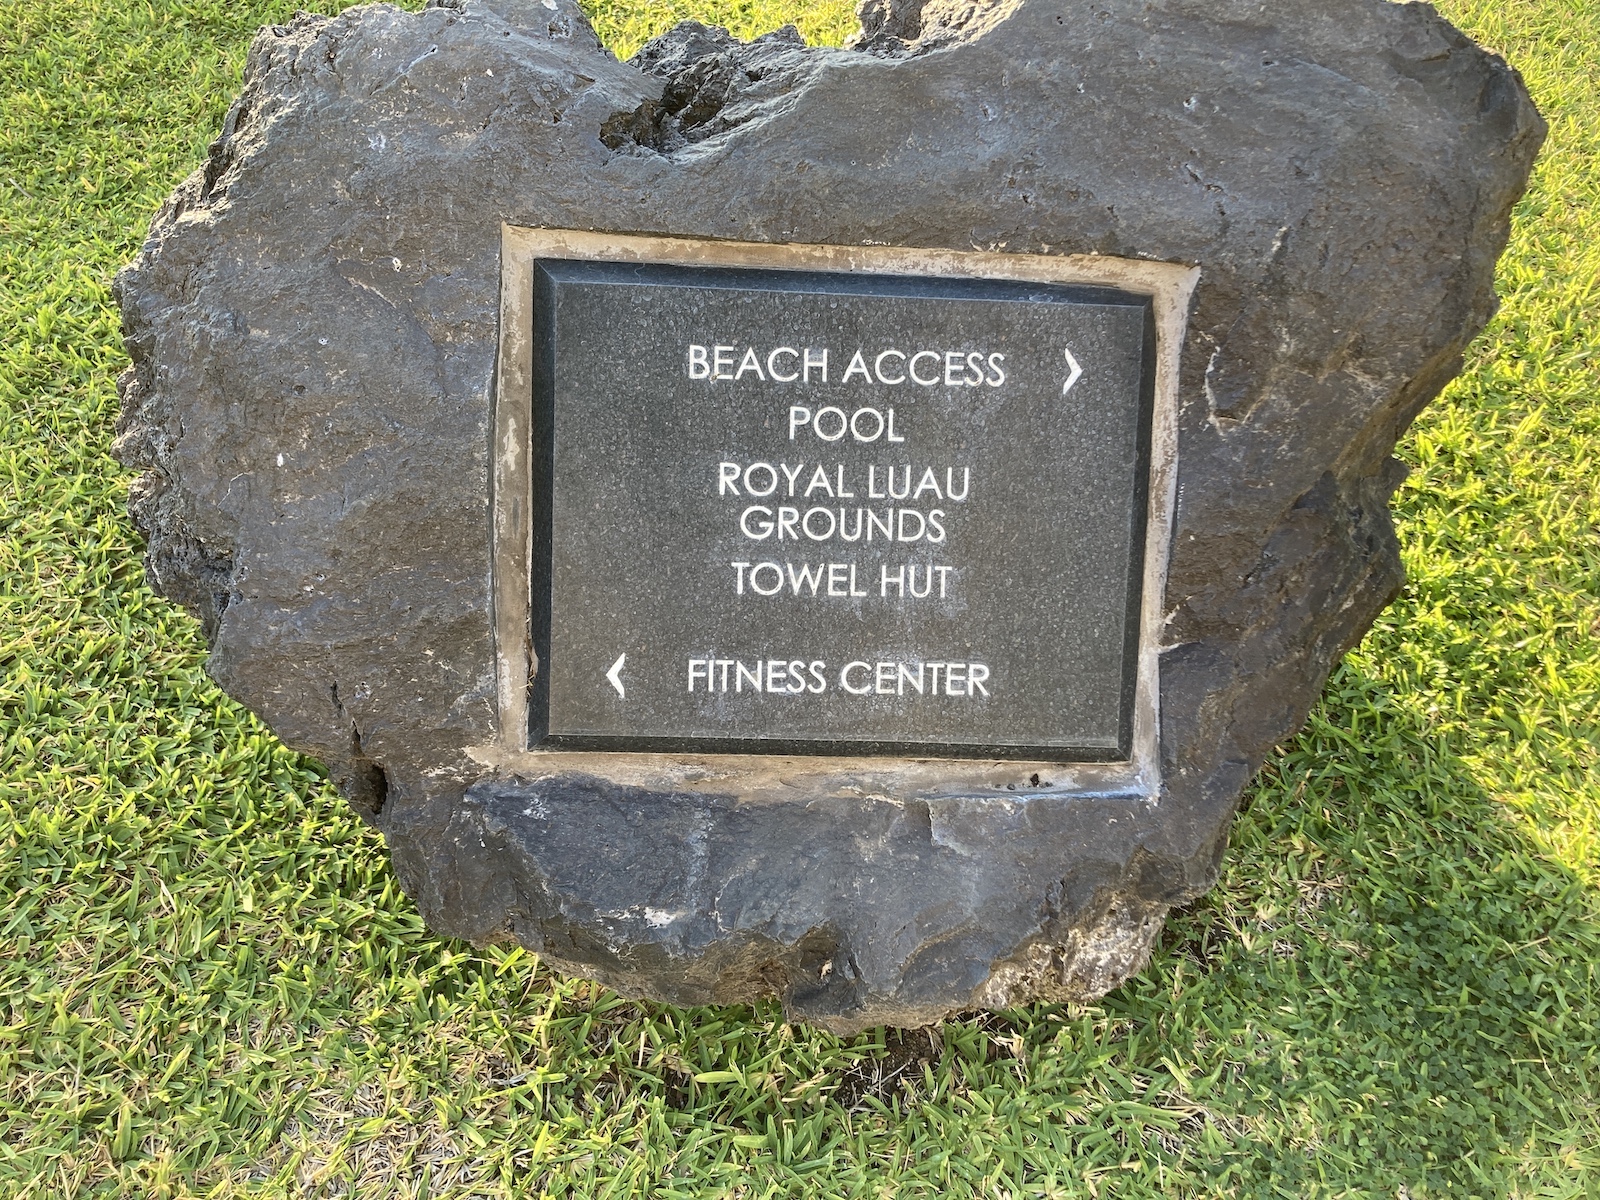 Photo of a metal plaque engraved in a rock giving directions